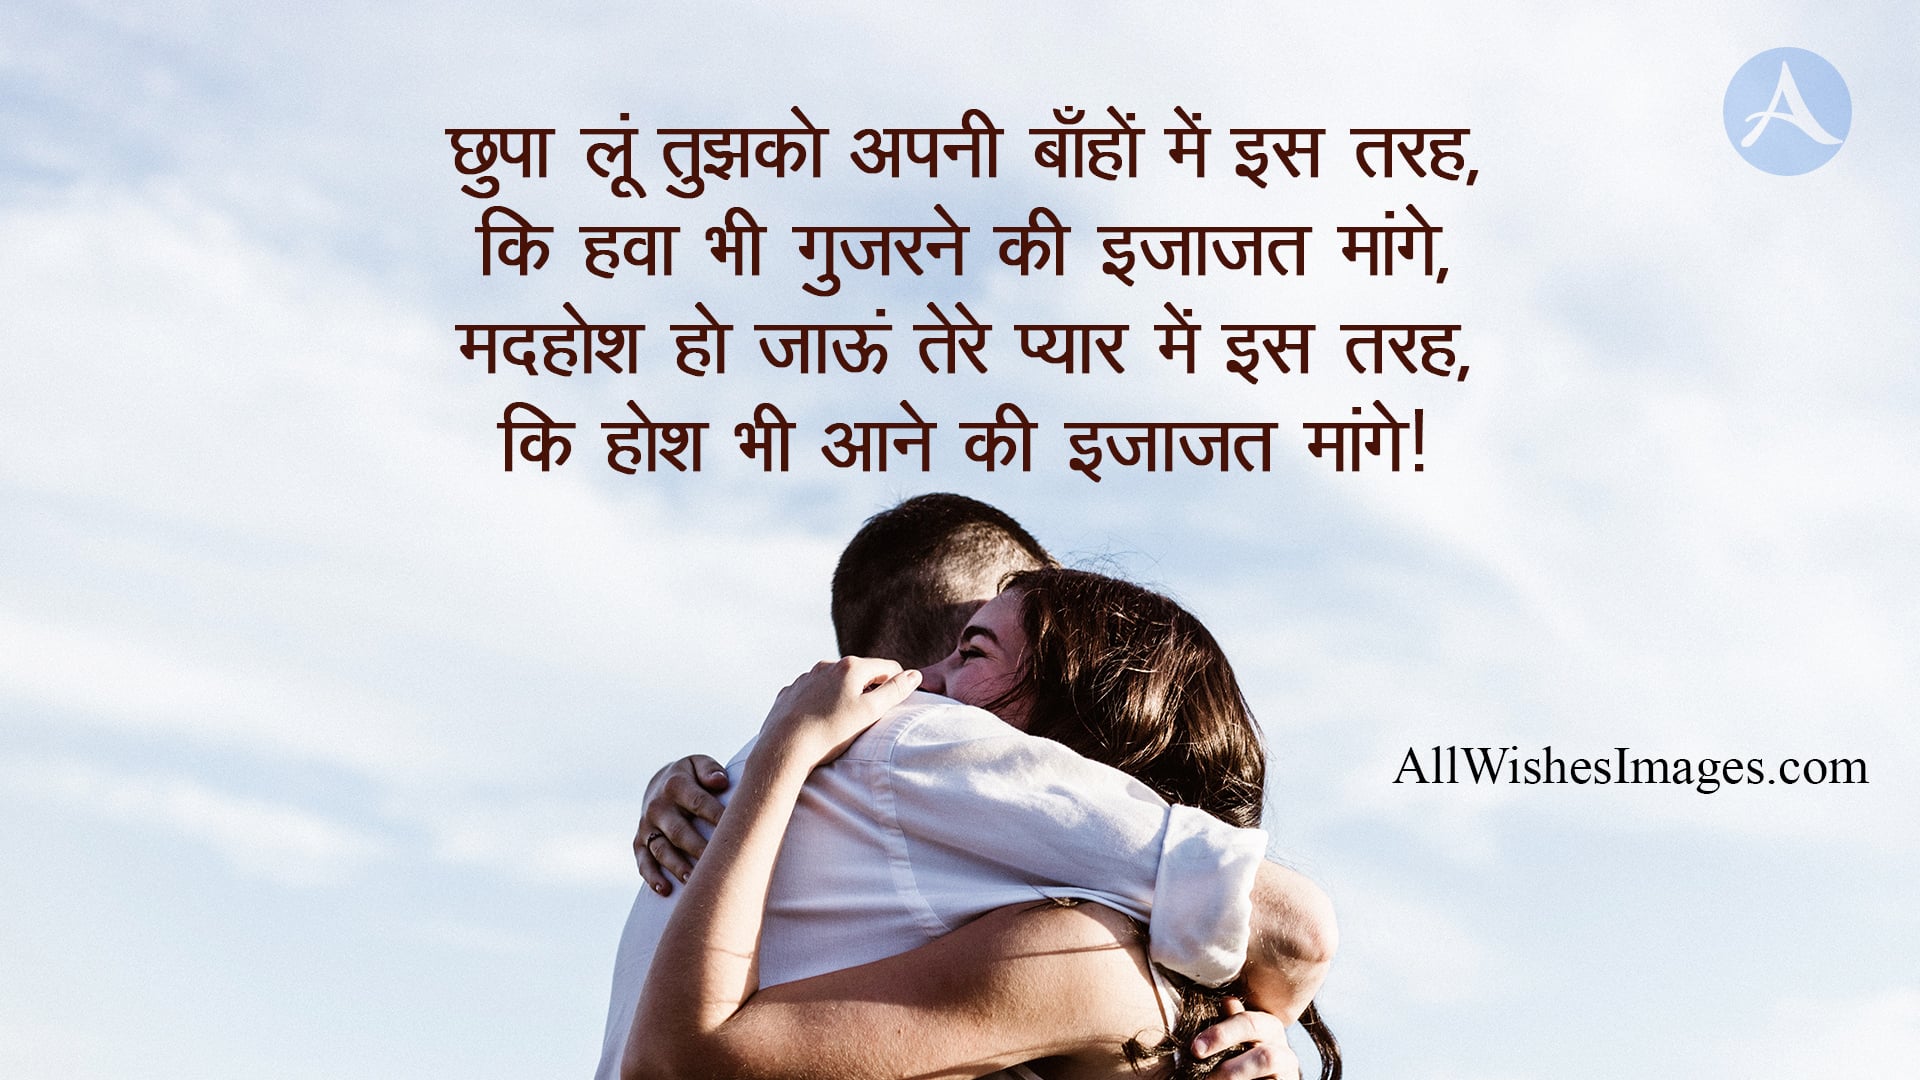 Hindi Love Quotes Images Download.